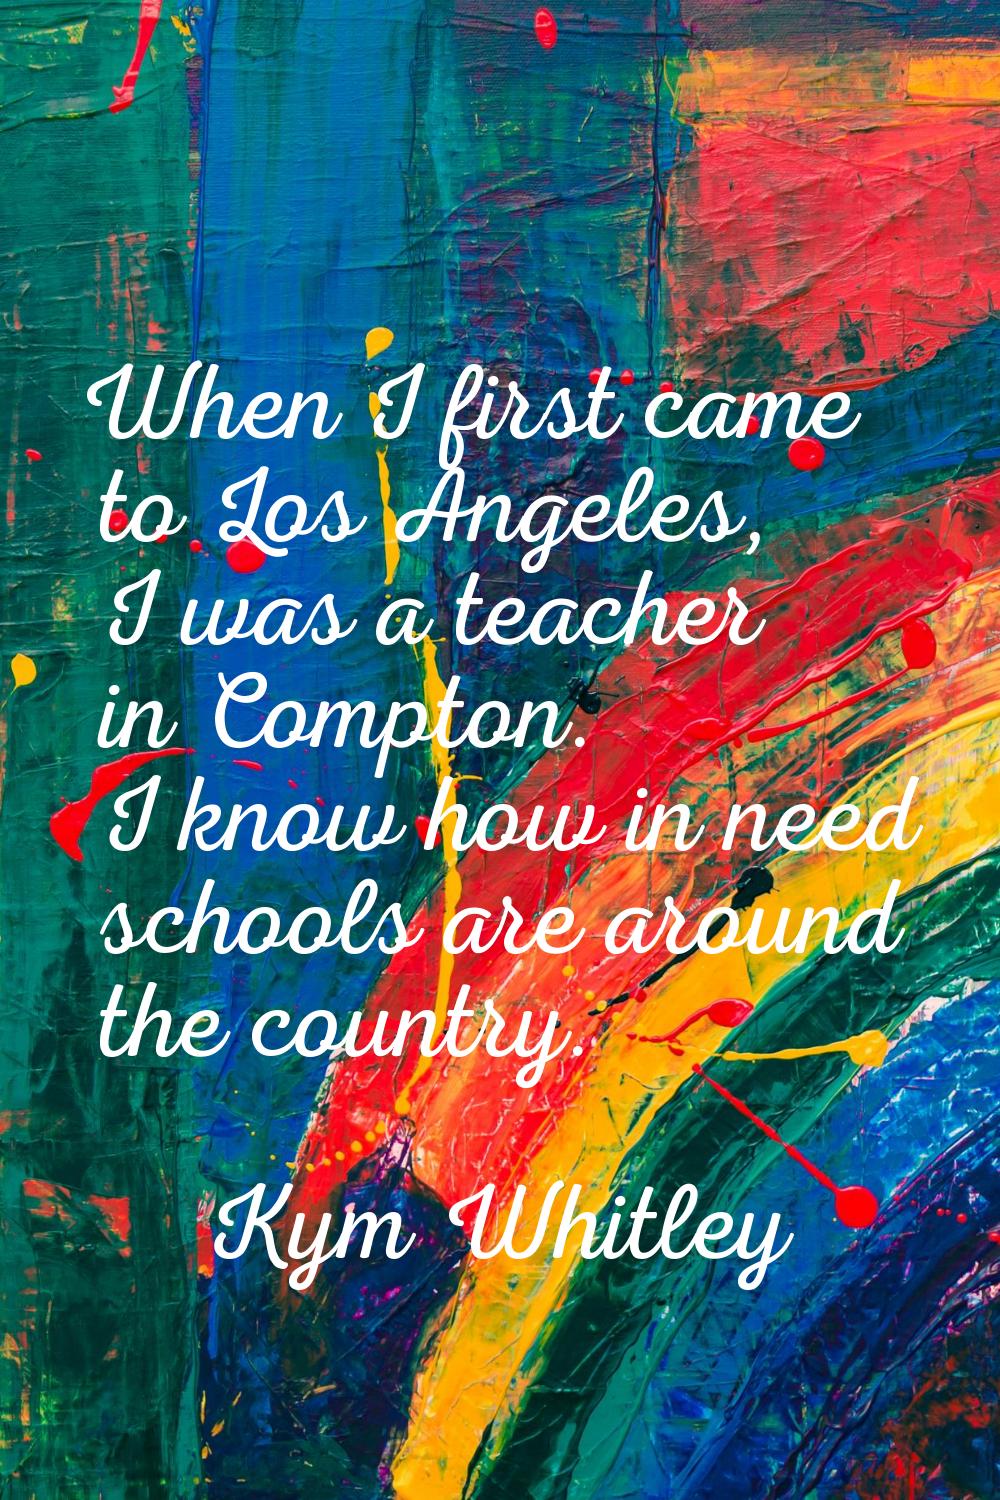 When I first came to Los Angeles, I was a teacher in Compton. I know how in need schools are around